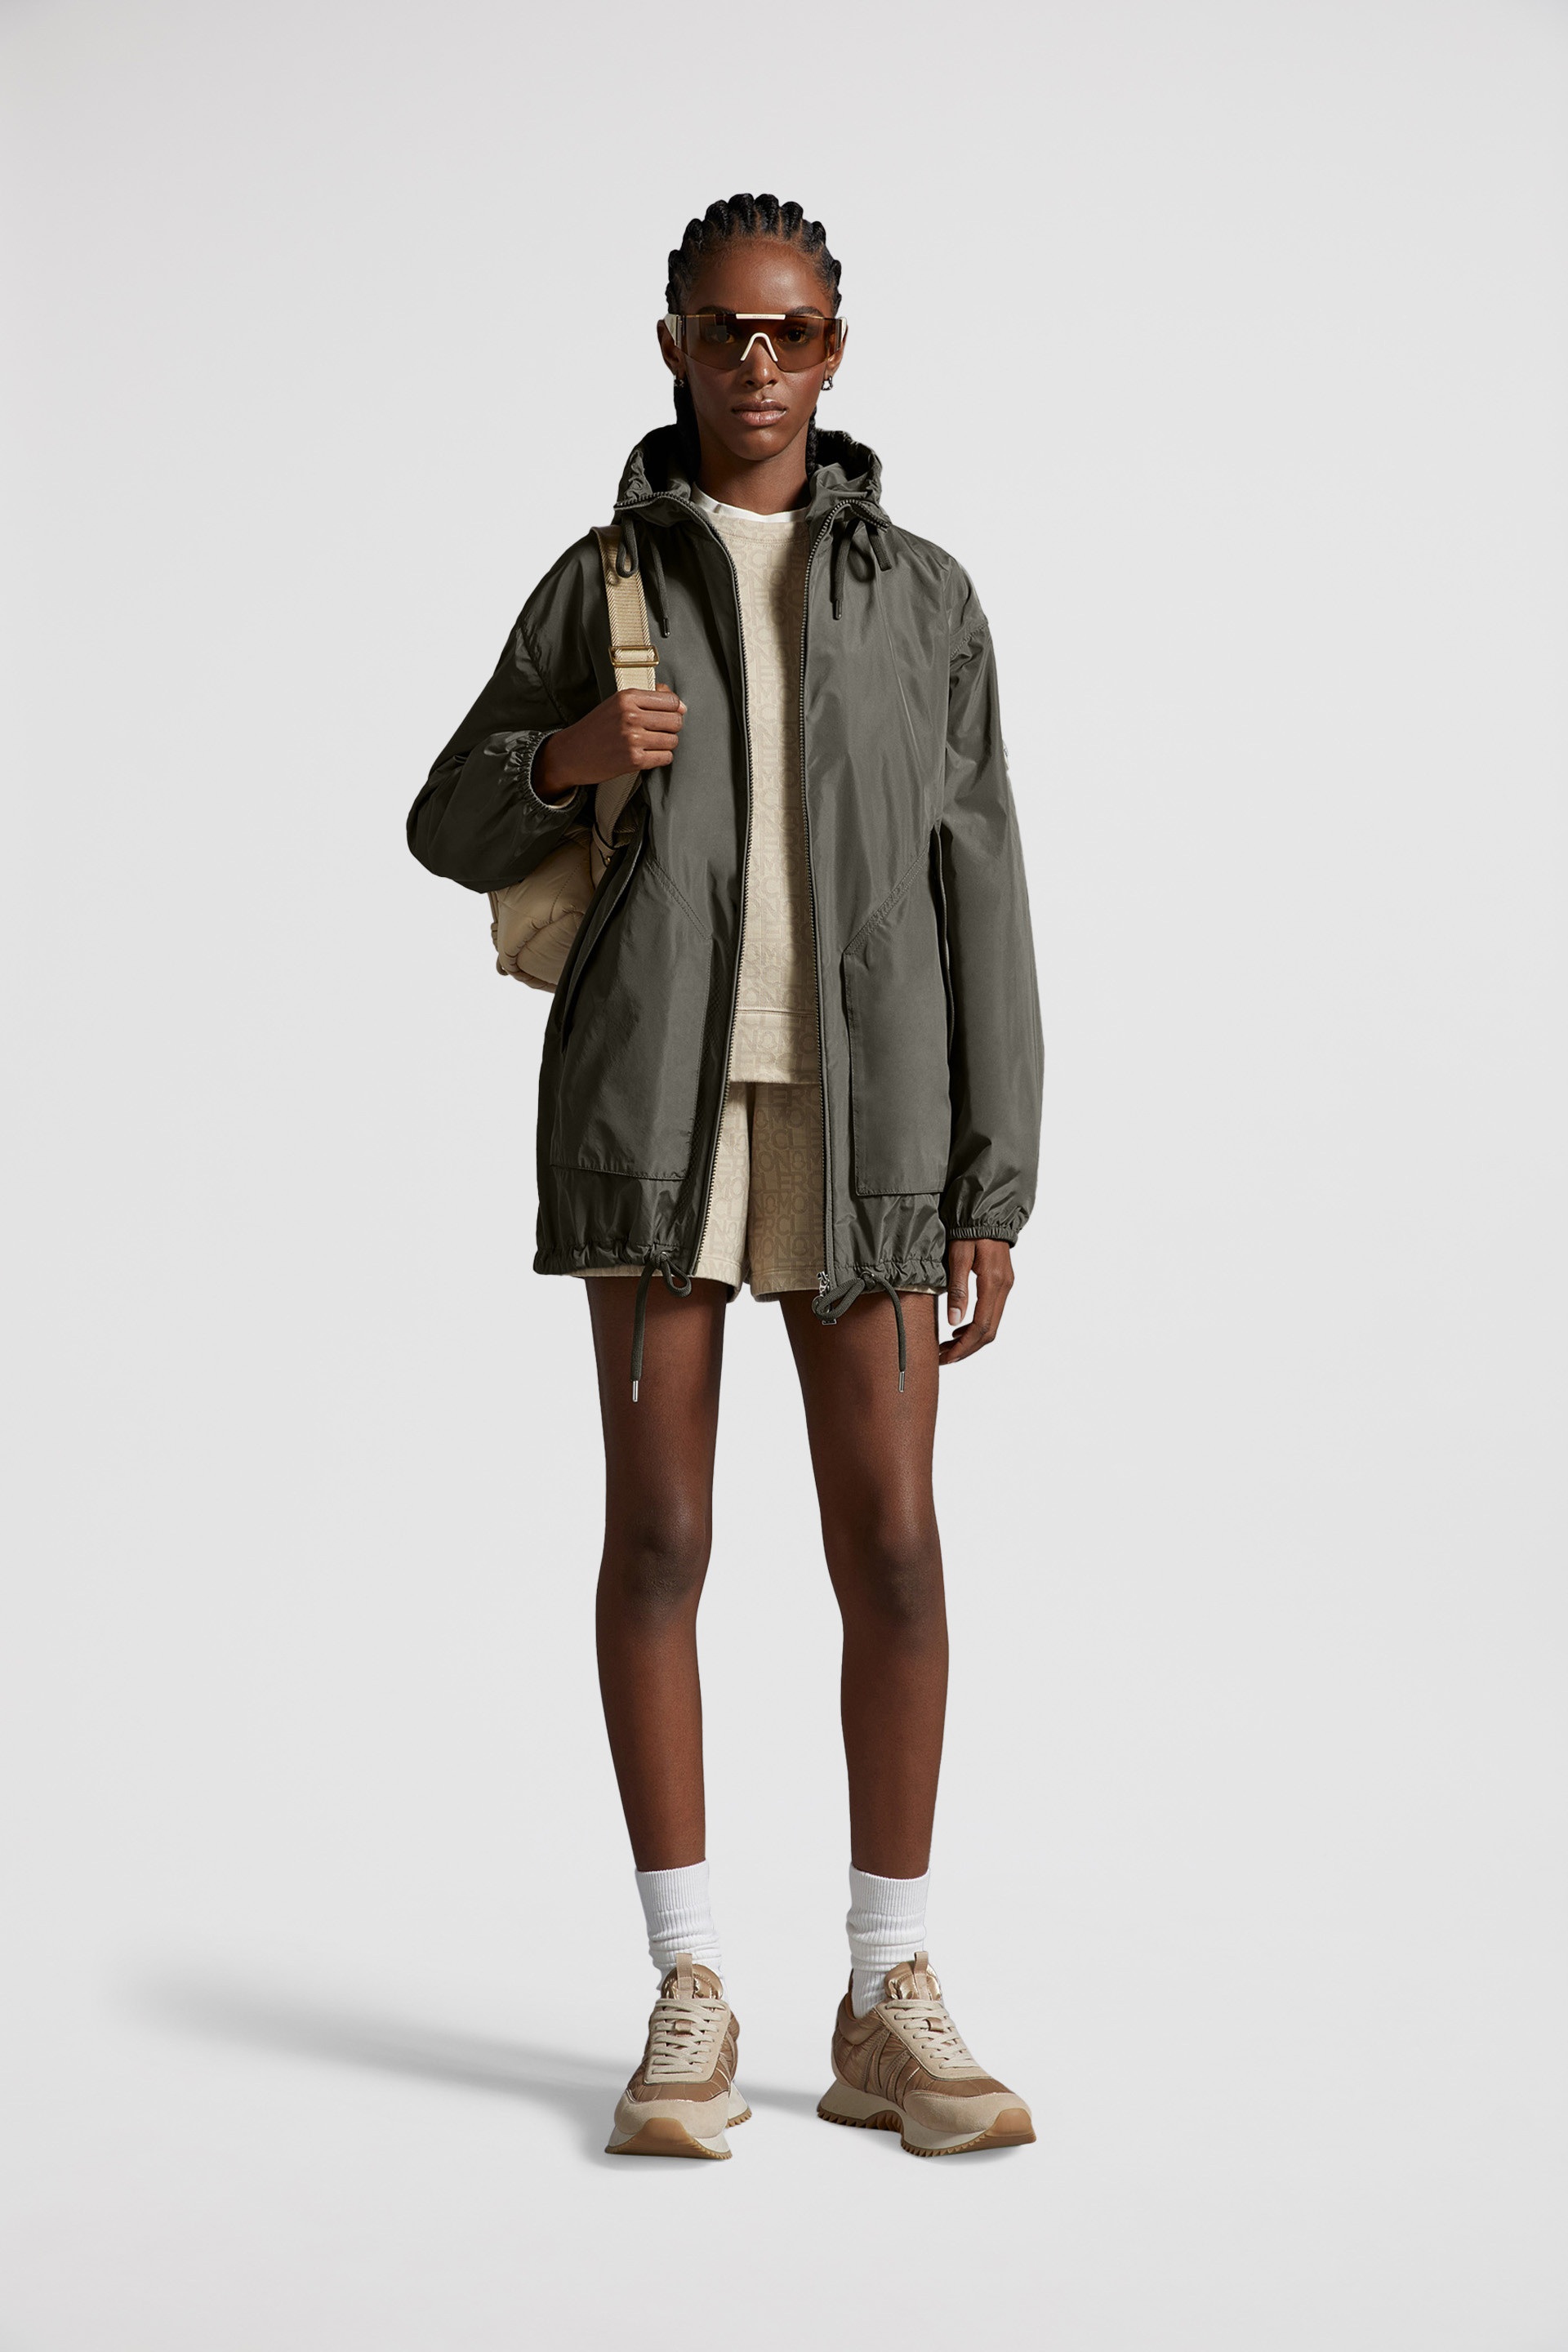 Moncler Women - Outerwear, Clothing & Accessories